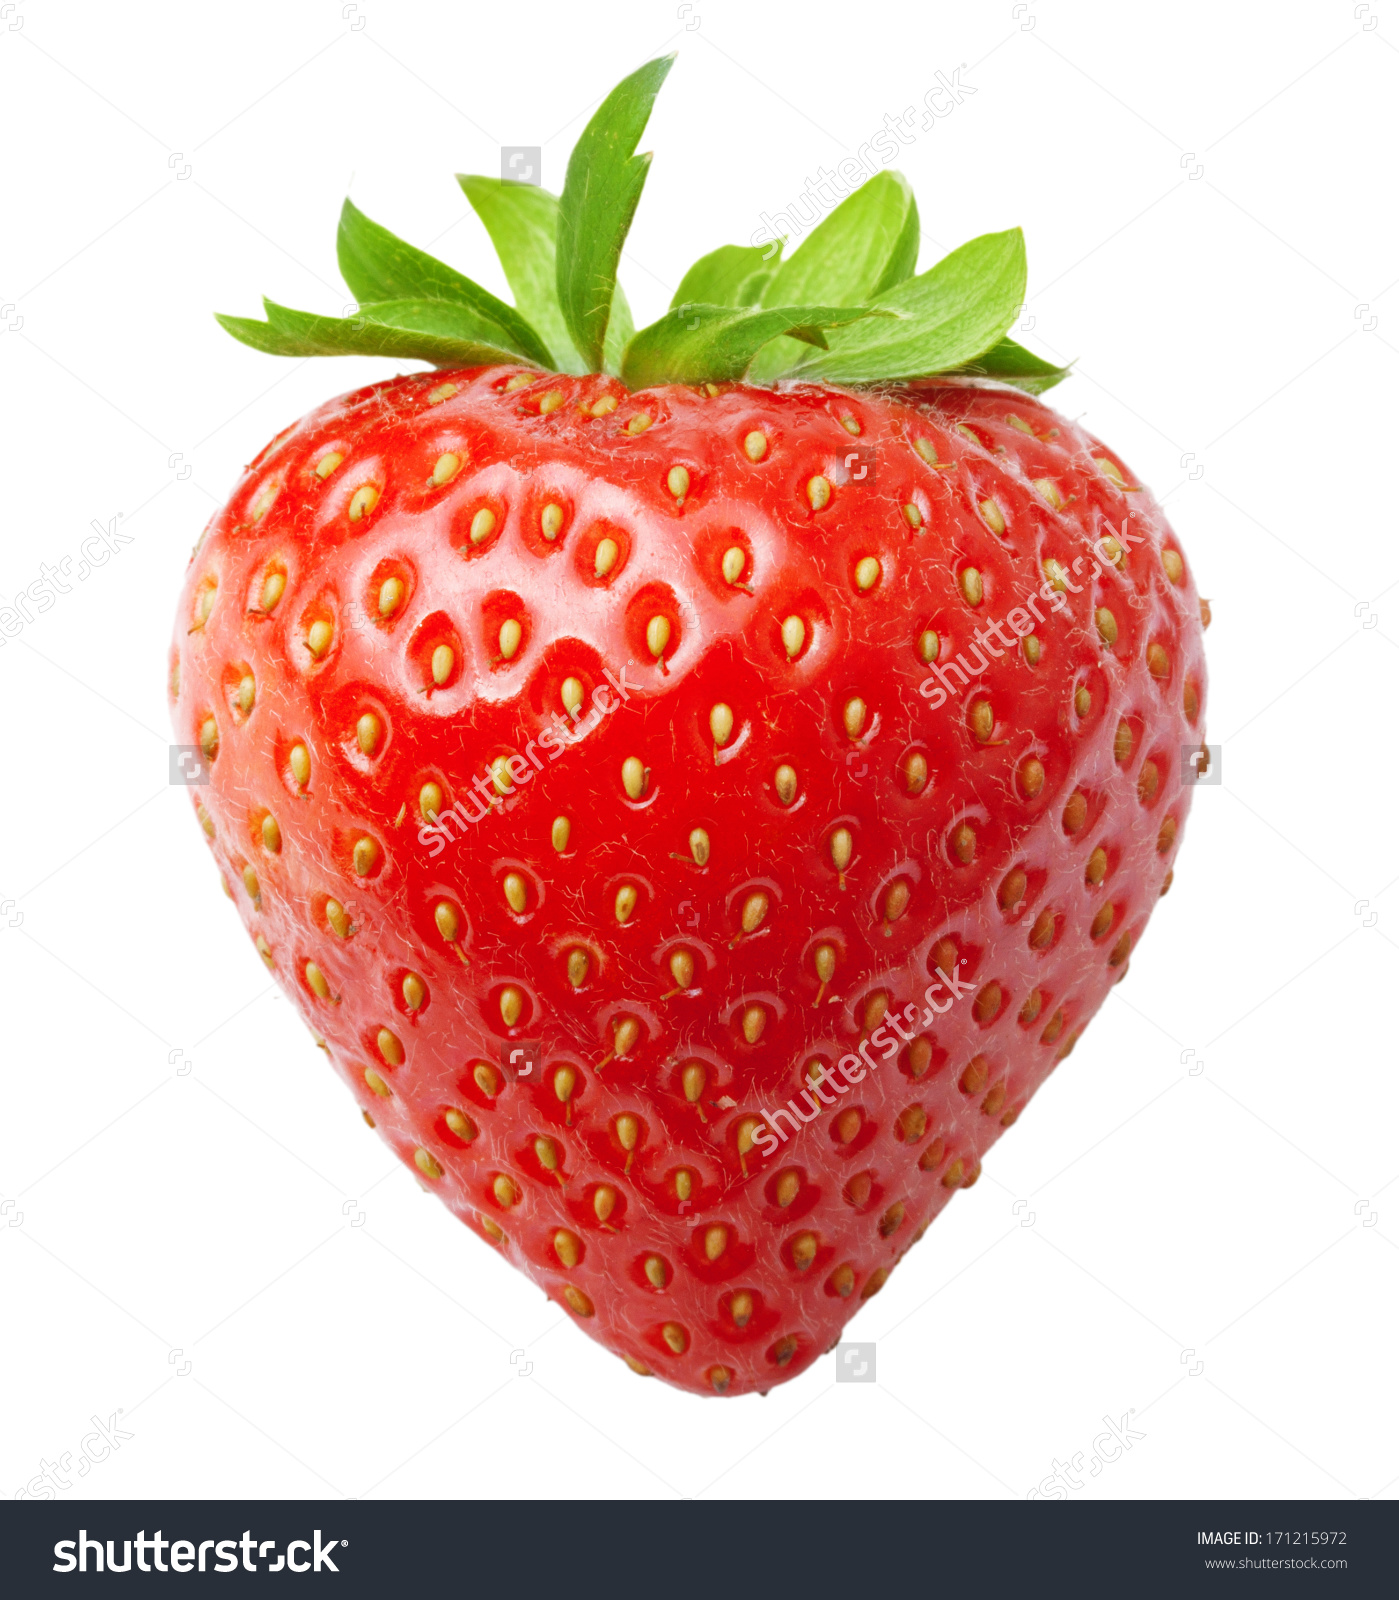 Images of Strawberry | 1399x1600